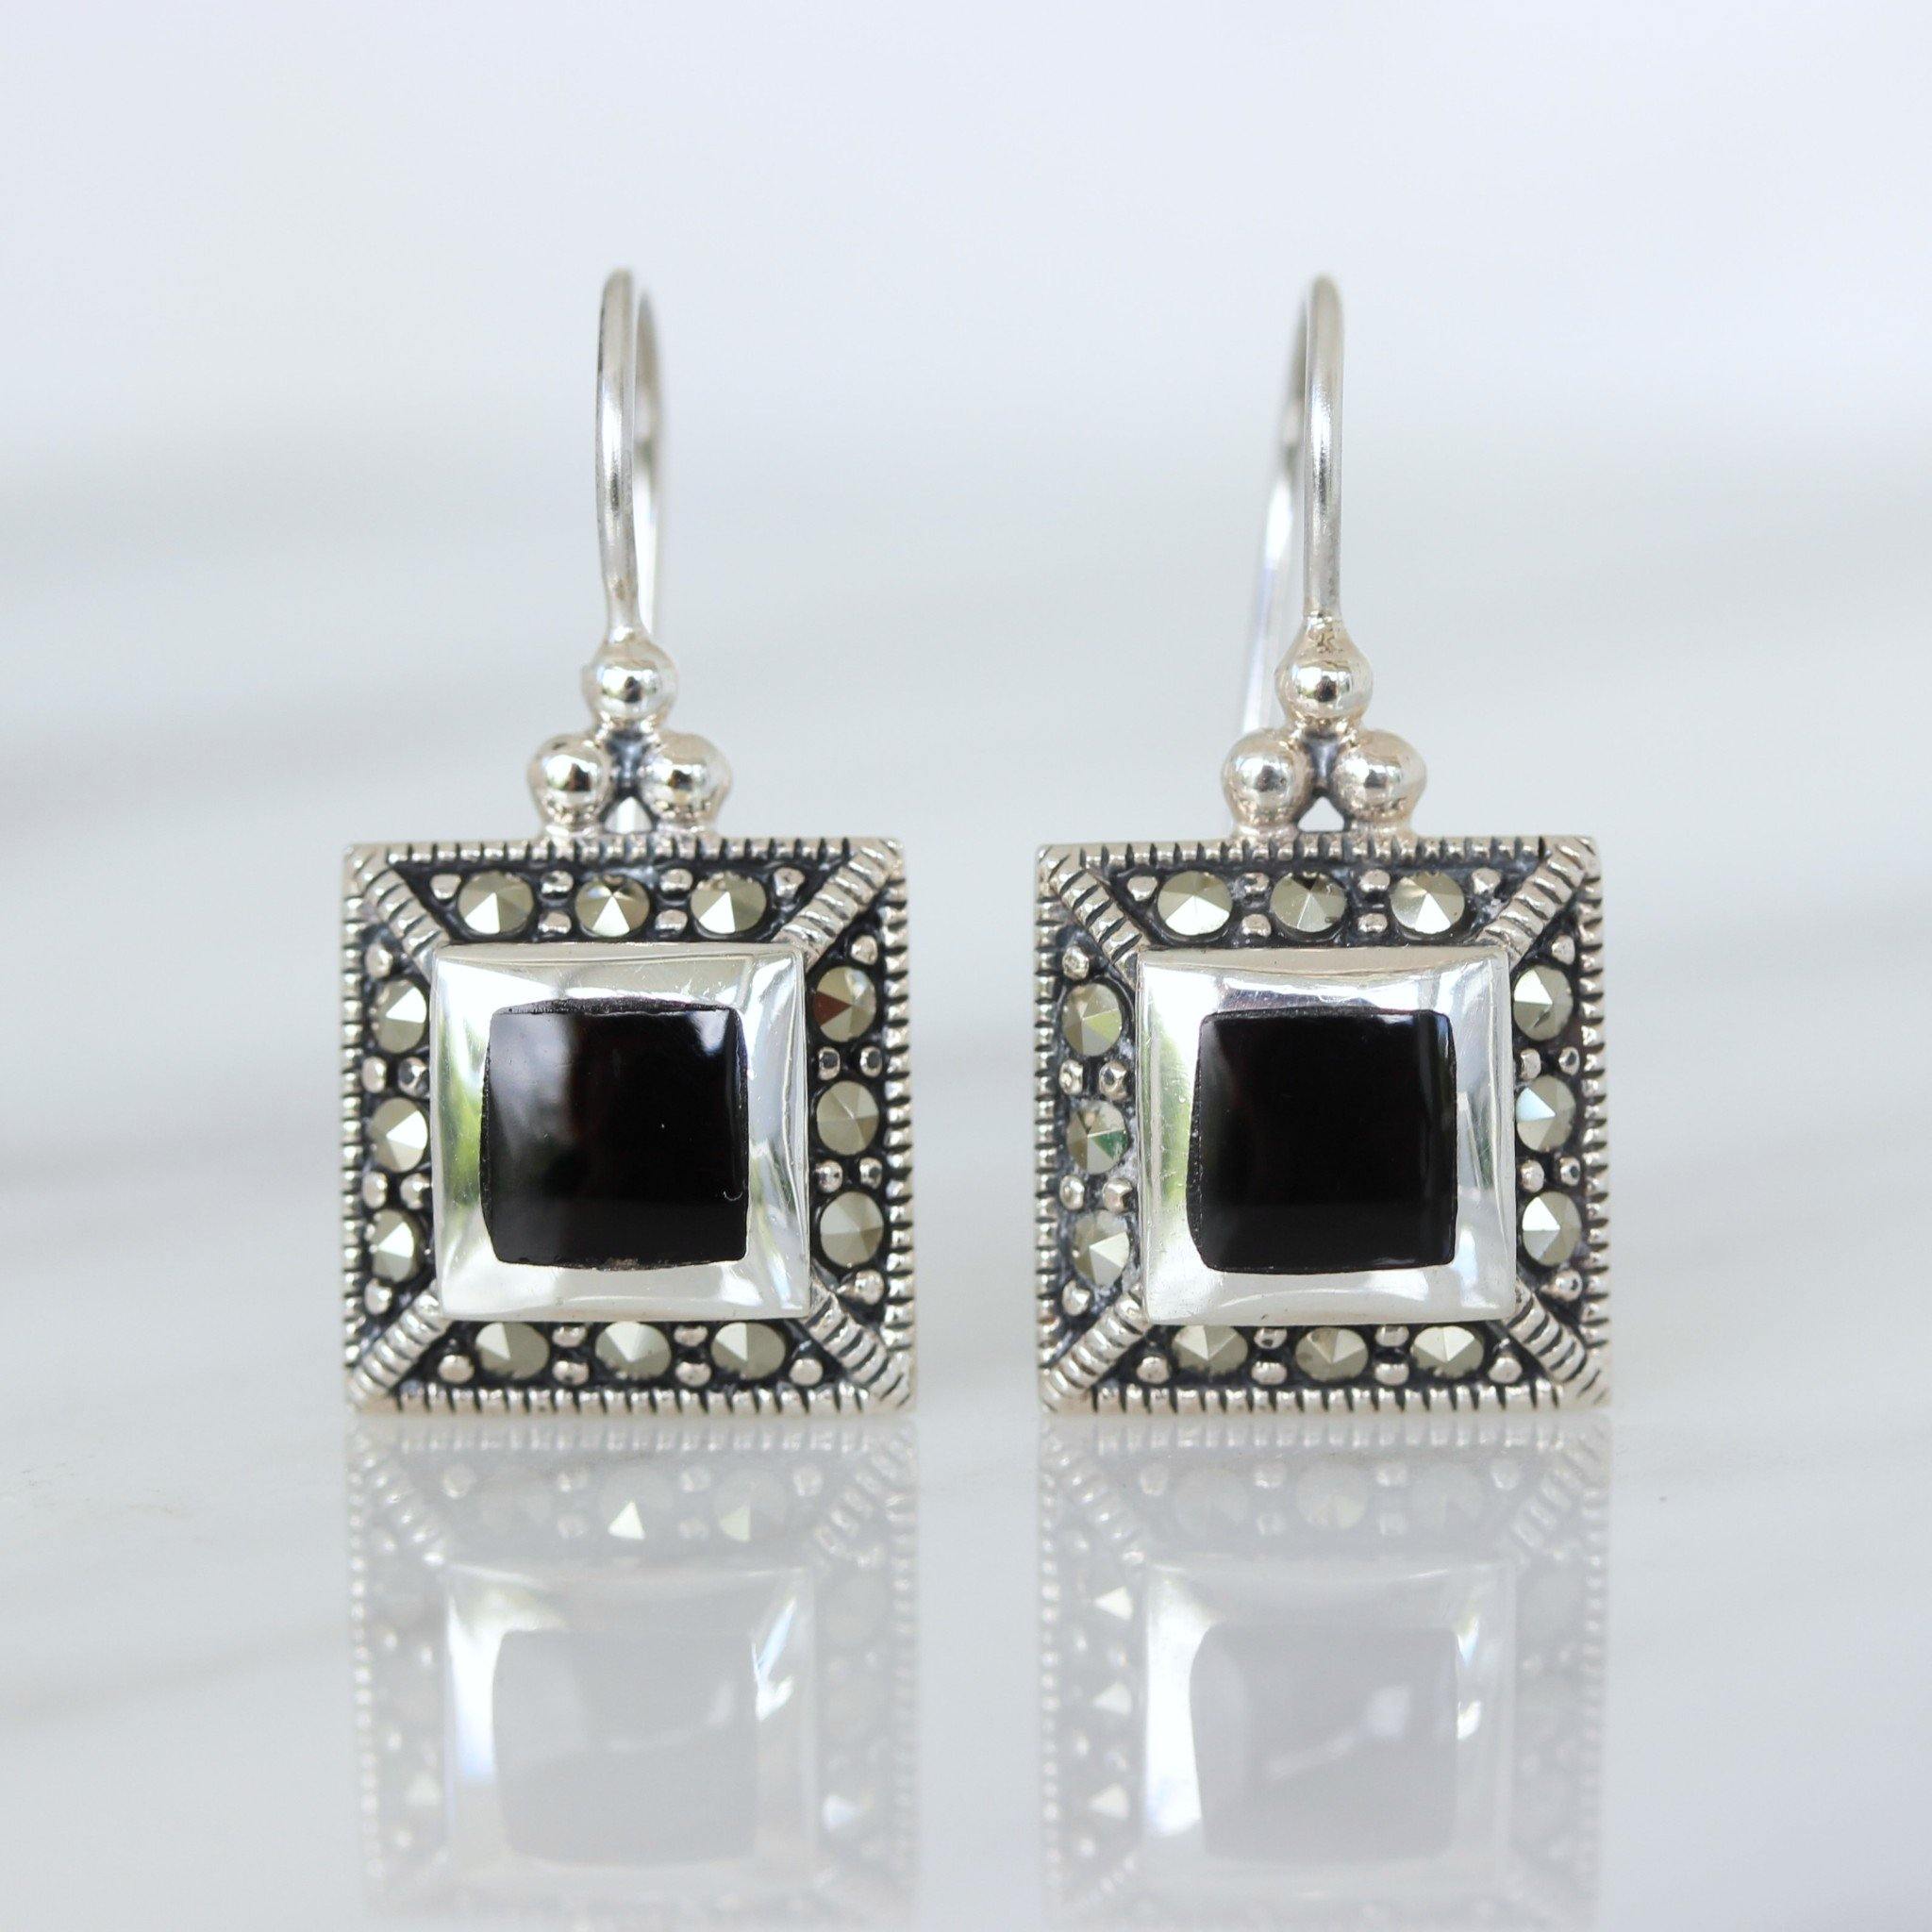 Sterling Silver Marcasite & Black Onyx Square Shape French Hook Drop Earrings - STERLING SILVER DESIGNS